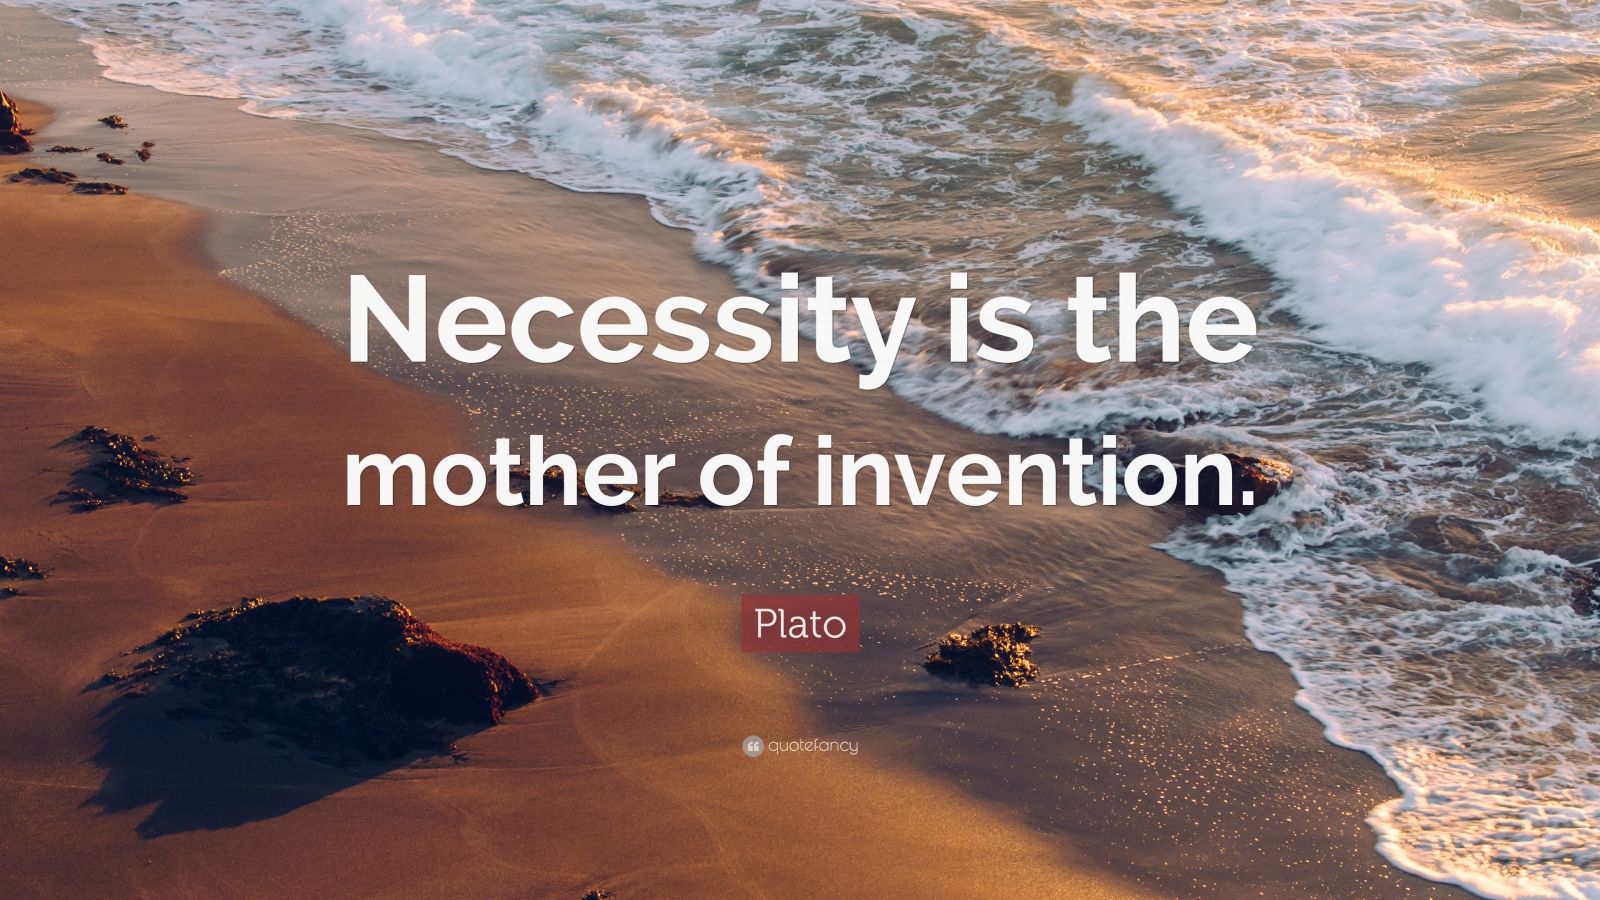 essay about necessity is the mother of invention